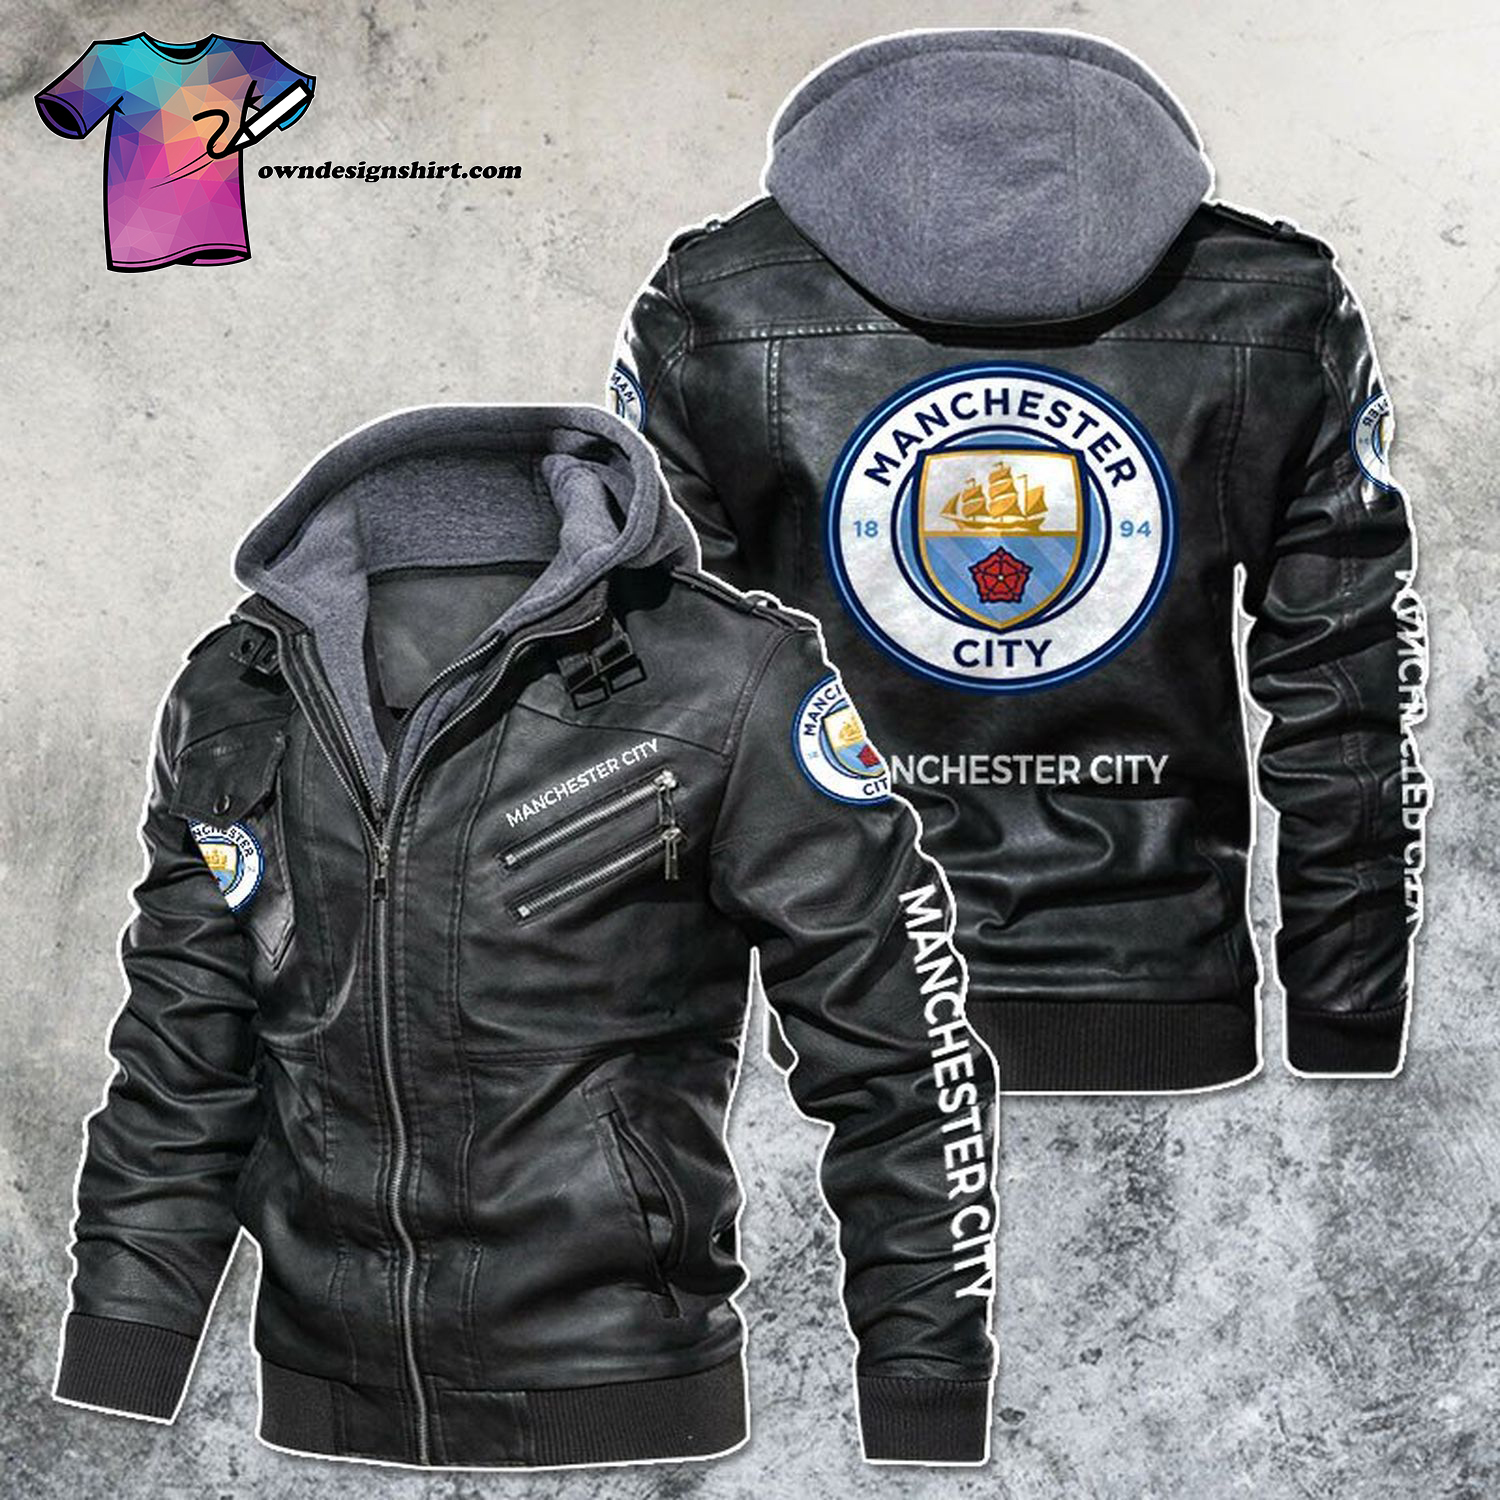 Manchester City Football Club Leather Jacket